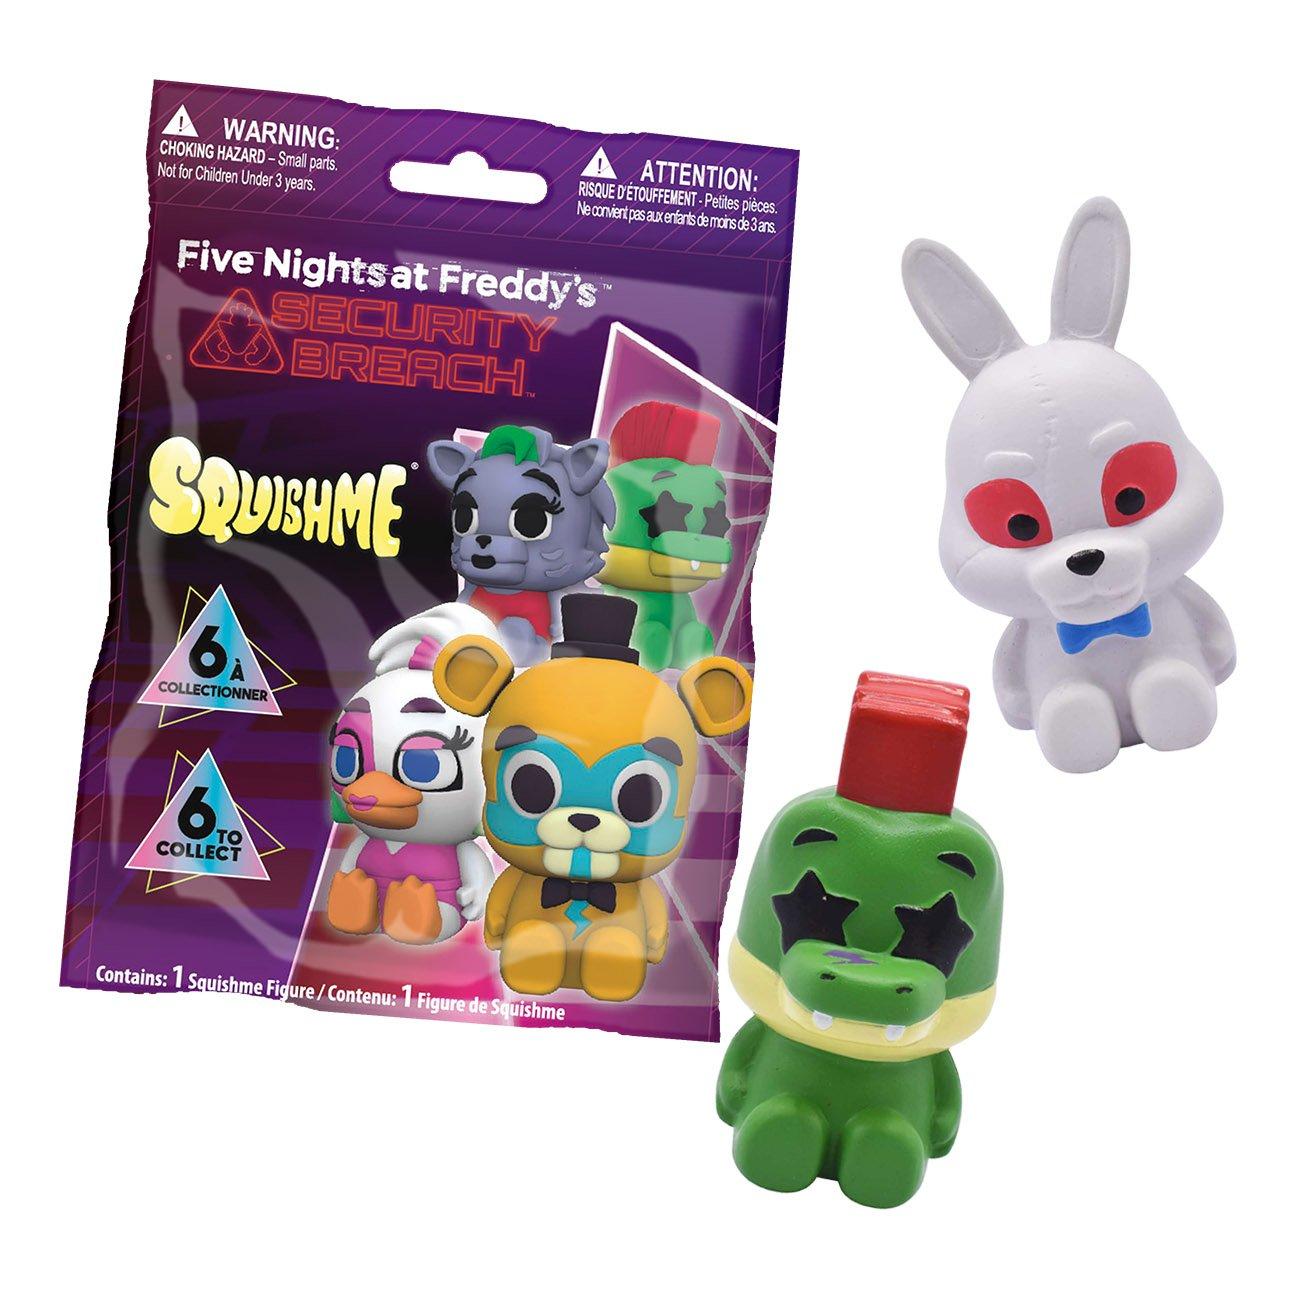 Buy 3 Select Five Nights at Freddy's or Among Us Products Get 1 Free + Free Store Pickup at GameStop or Free Shipping on Orders $59+